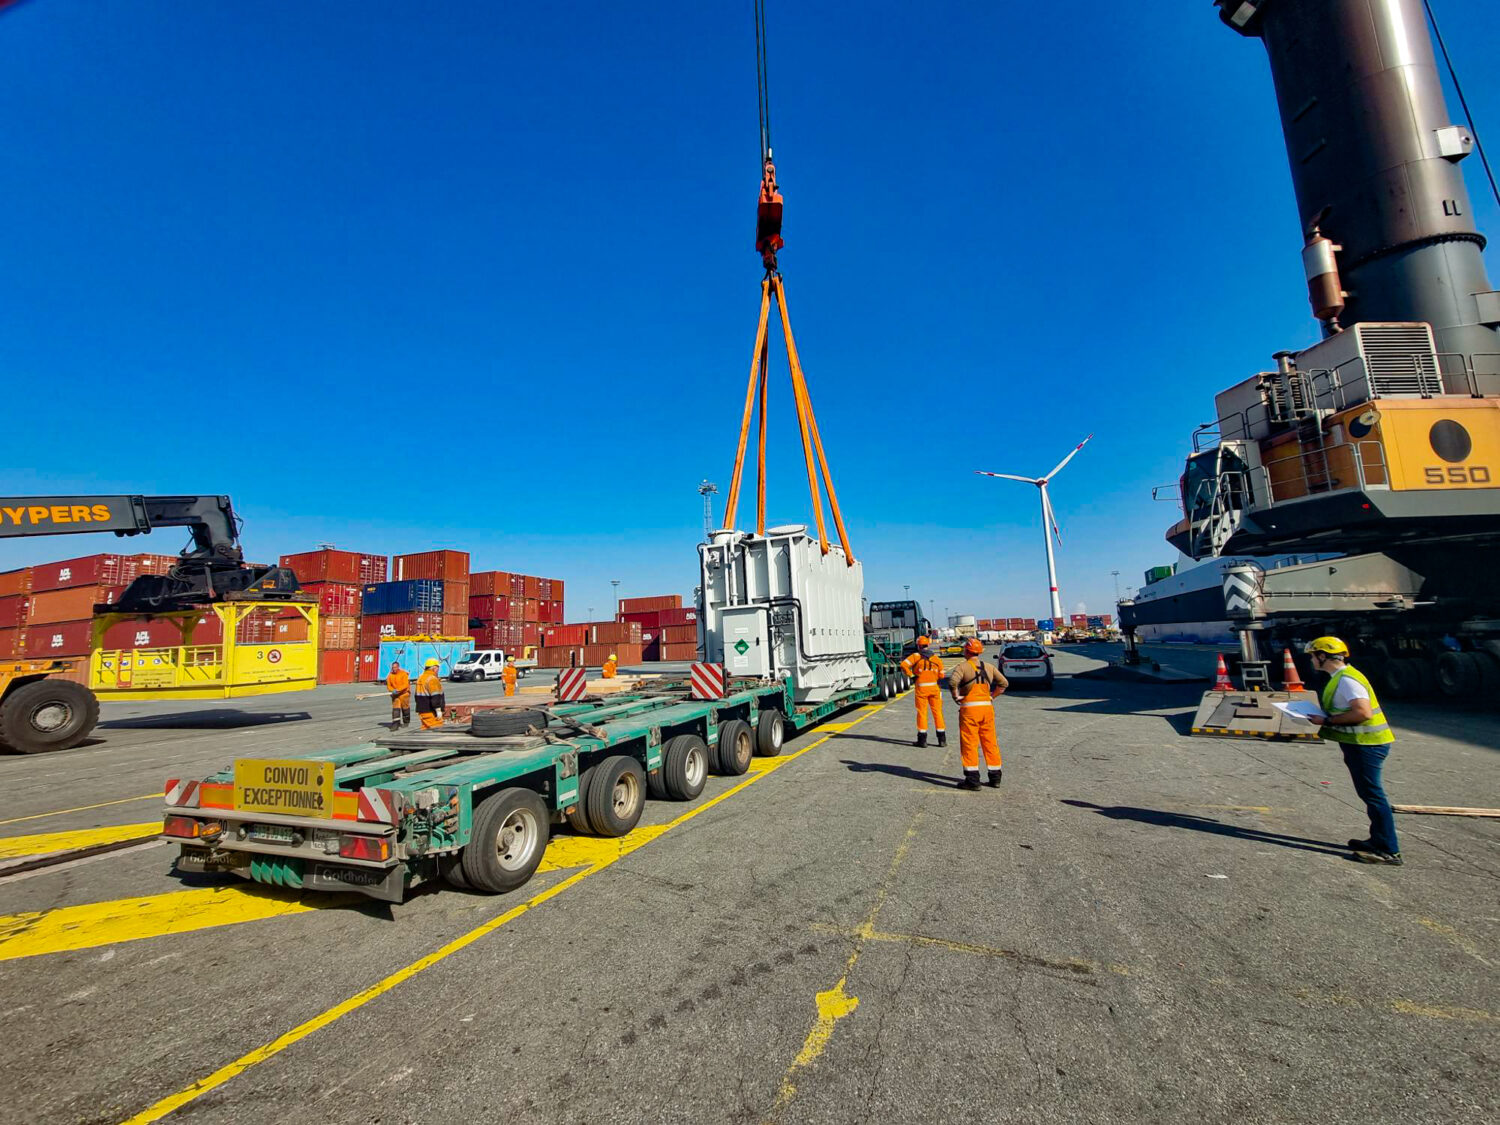 OIA transported 8 massive transporters from Regensburg, Germany through the Port of Antwerp toward final delivery in Duala, Cameroon. Each transformer measured 678cm long, 297cm wide, 394cm high, and weighed 75,300 kilograms!